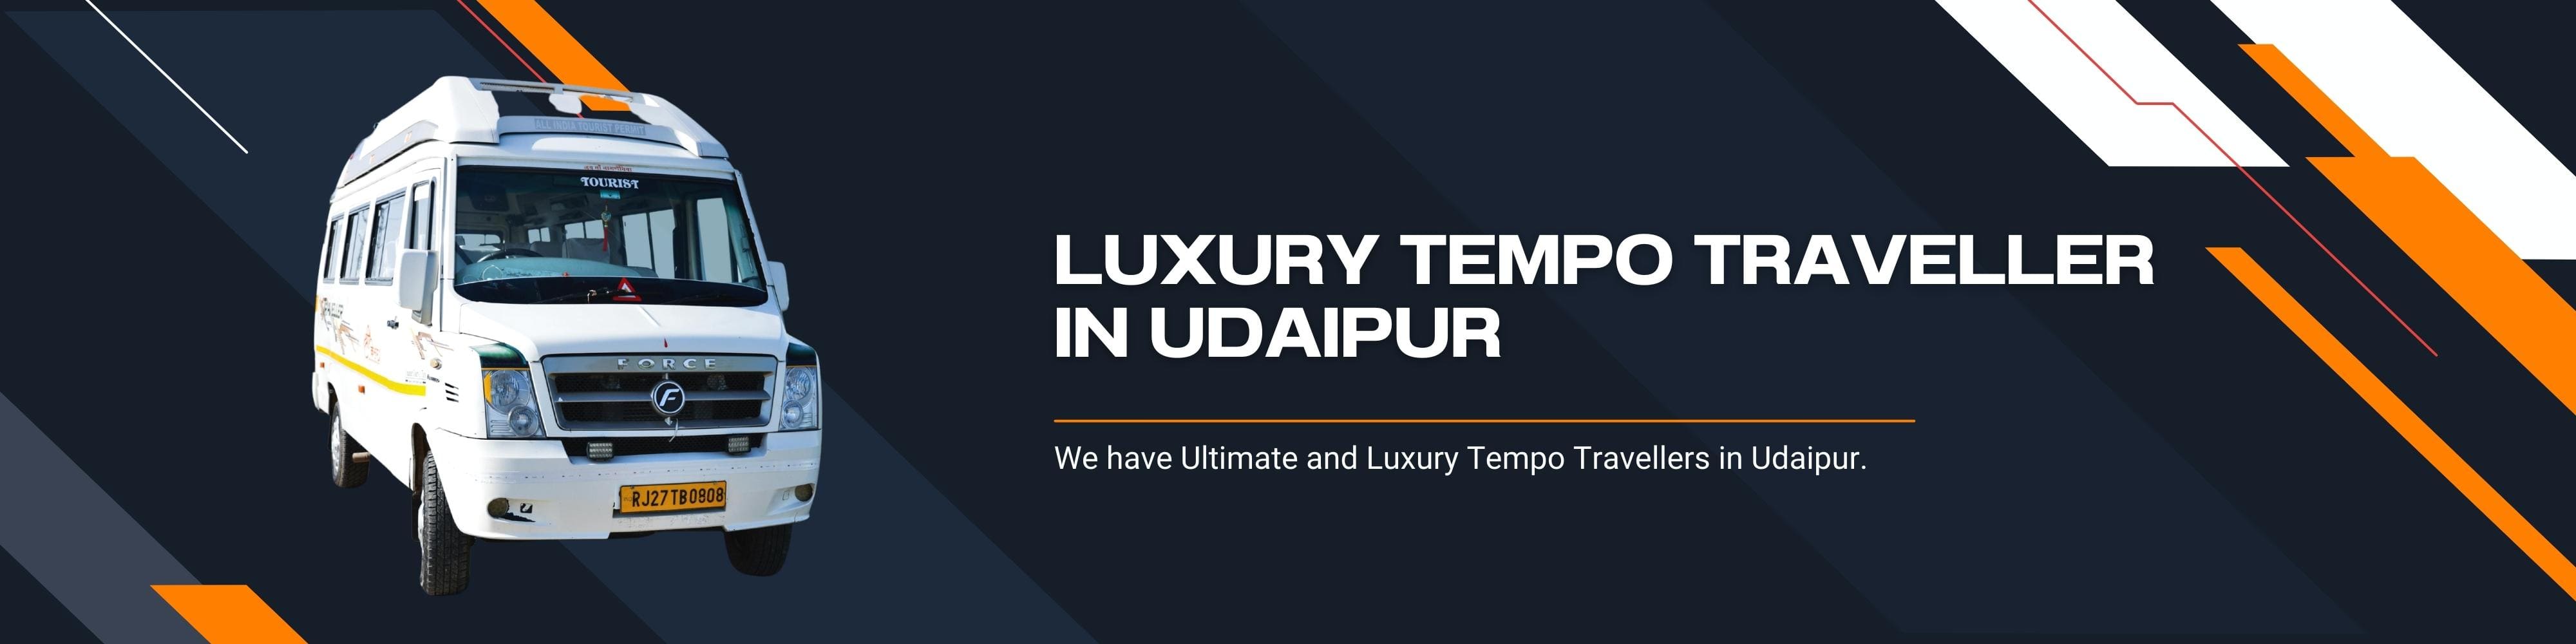 Luxury Tempo Traveller In Udaipur